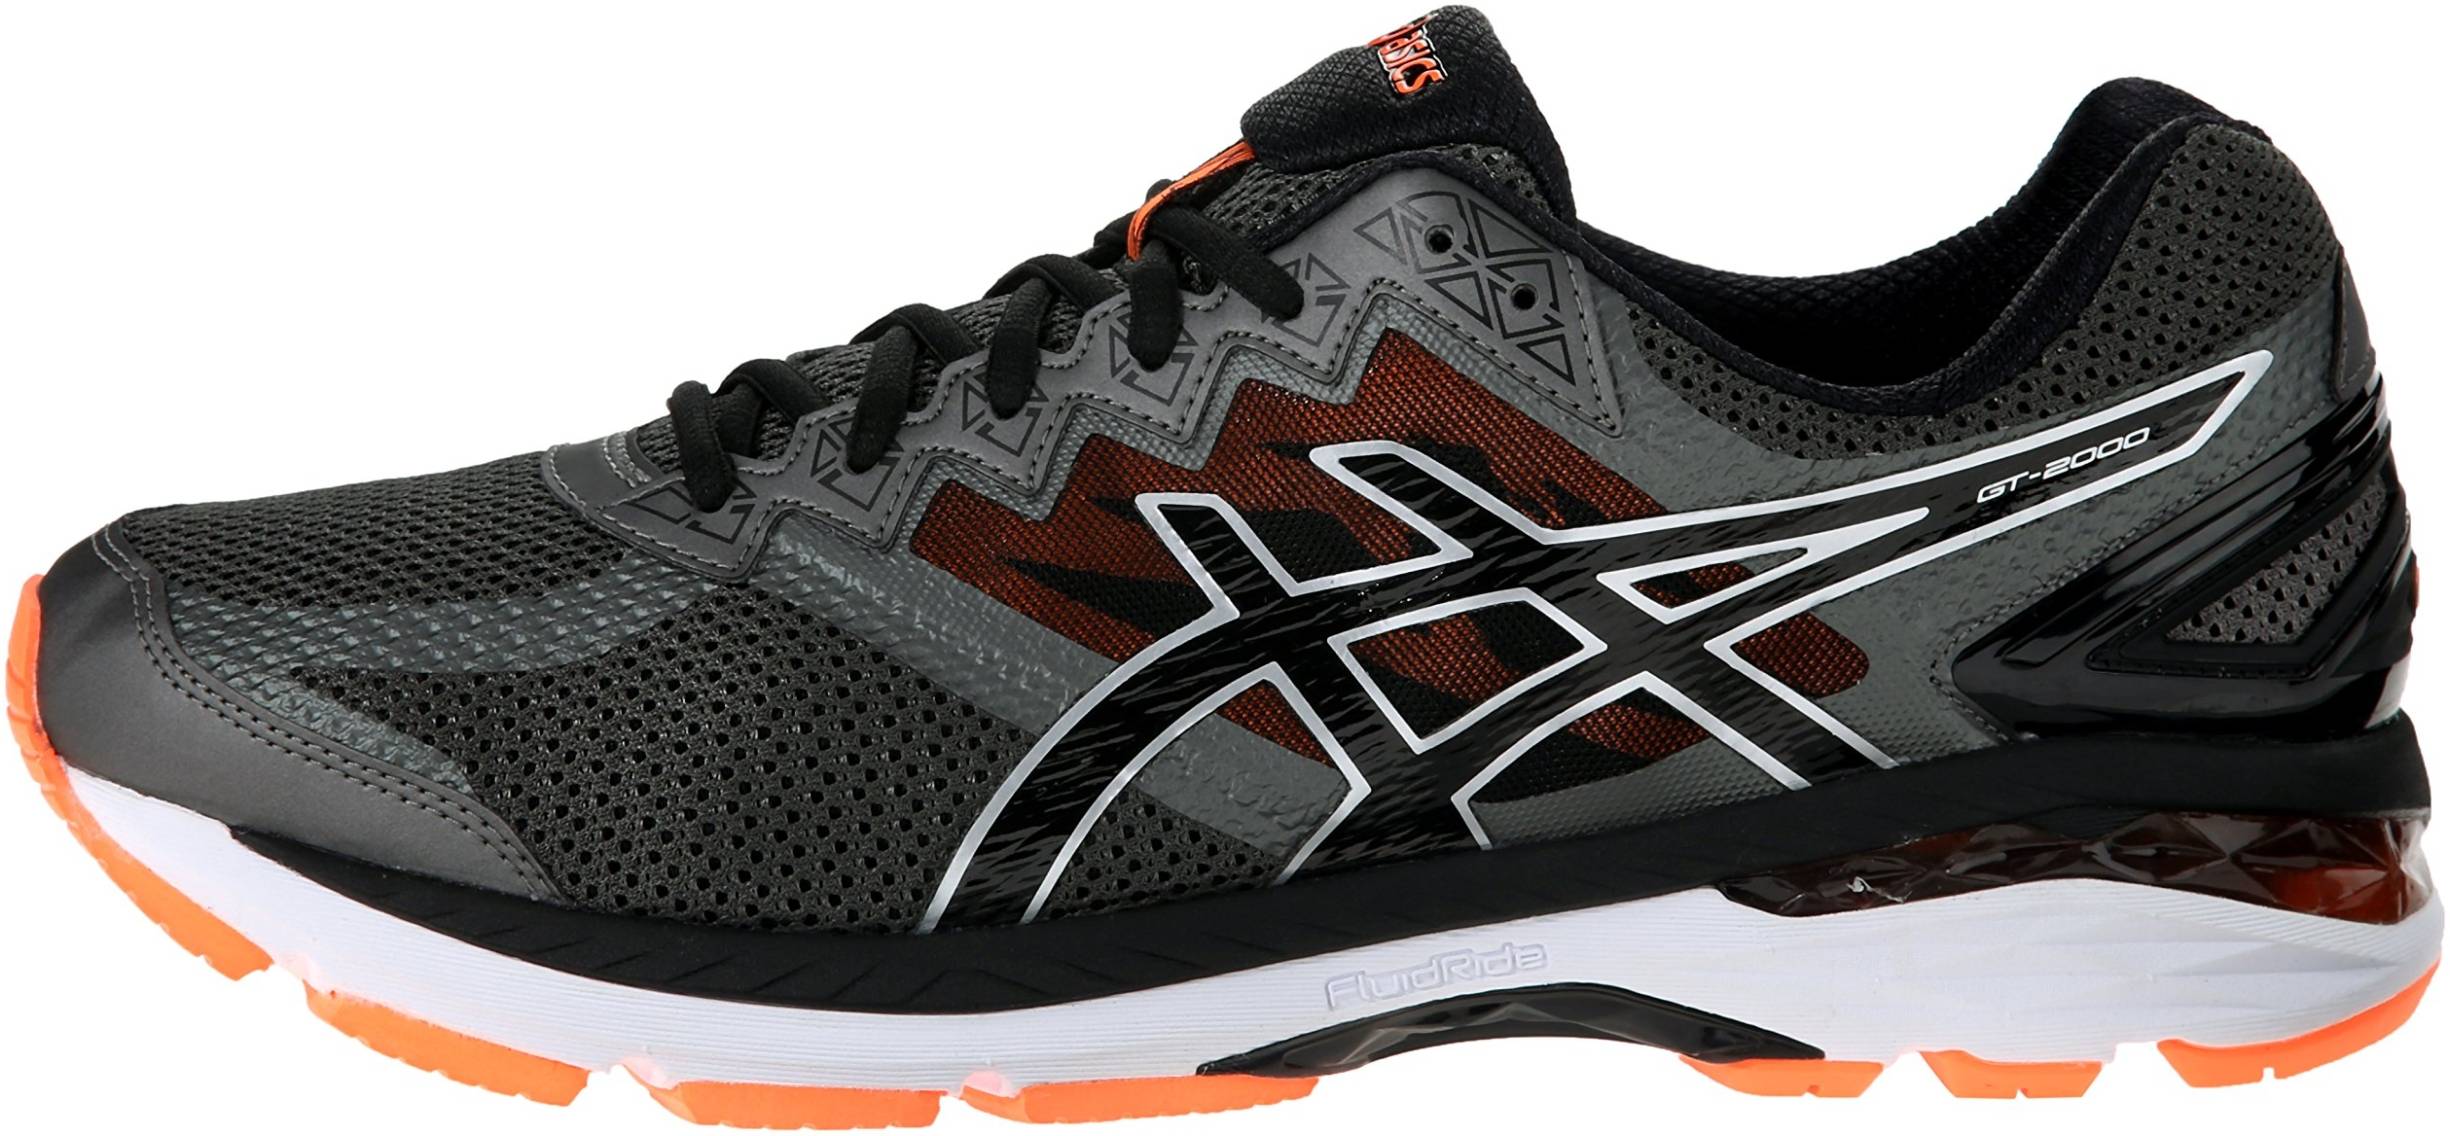 Only $70 + Review of Asics GT 2000 4 | RunRepeat